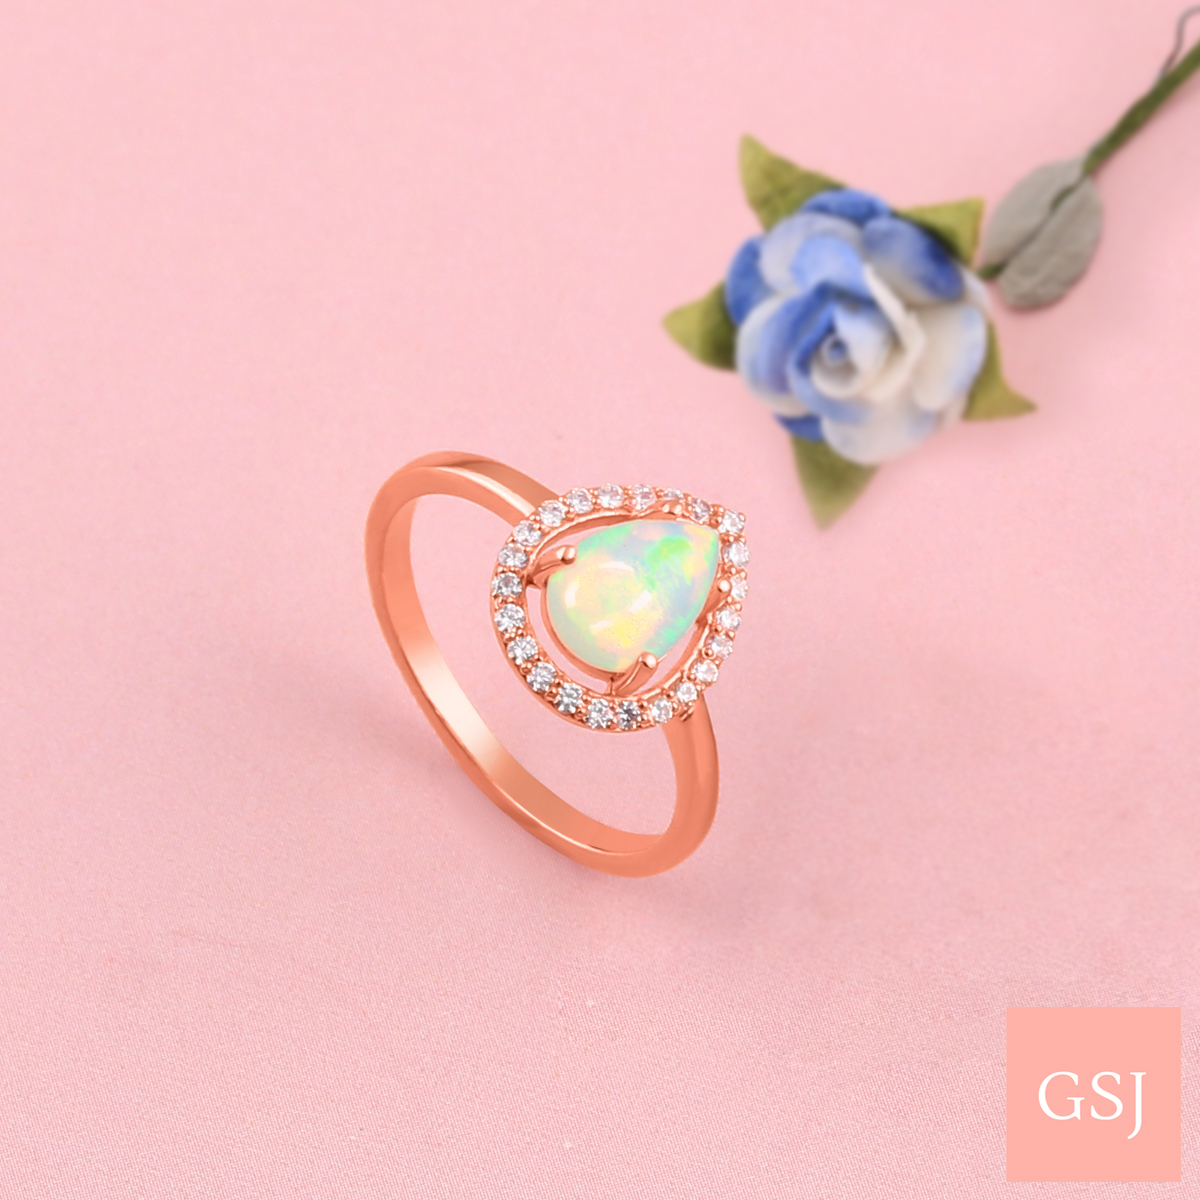 This exquisite, dainty Pear Moonstone Ring gets complete with immaculate design. 
Stay cosy this Xmas with this remembrance of Spring-Summer!
#GSJ #stonejewelry #925sterlingsilver #onlinejewelery #jewelryforwomen #moonstone #pearring  #rosegold #vermeil #moonstonejewelery